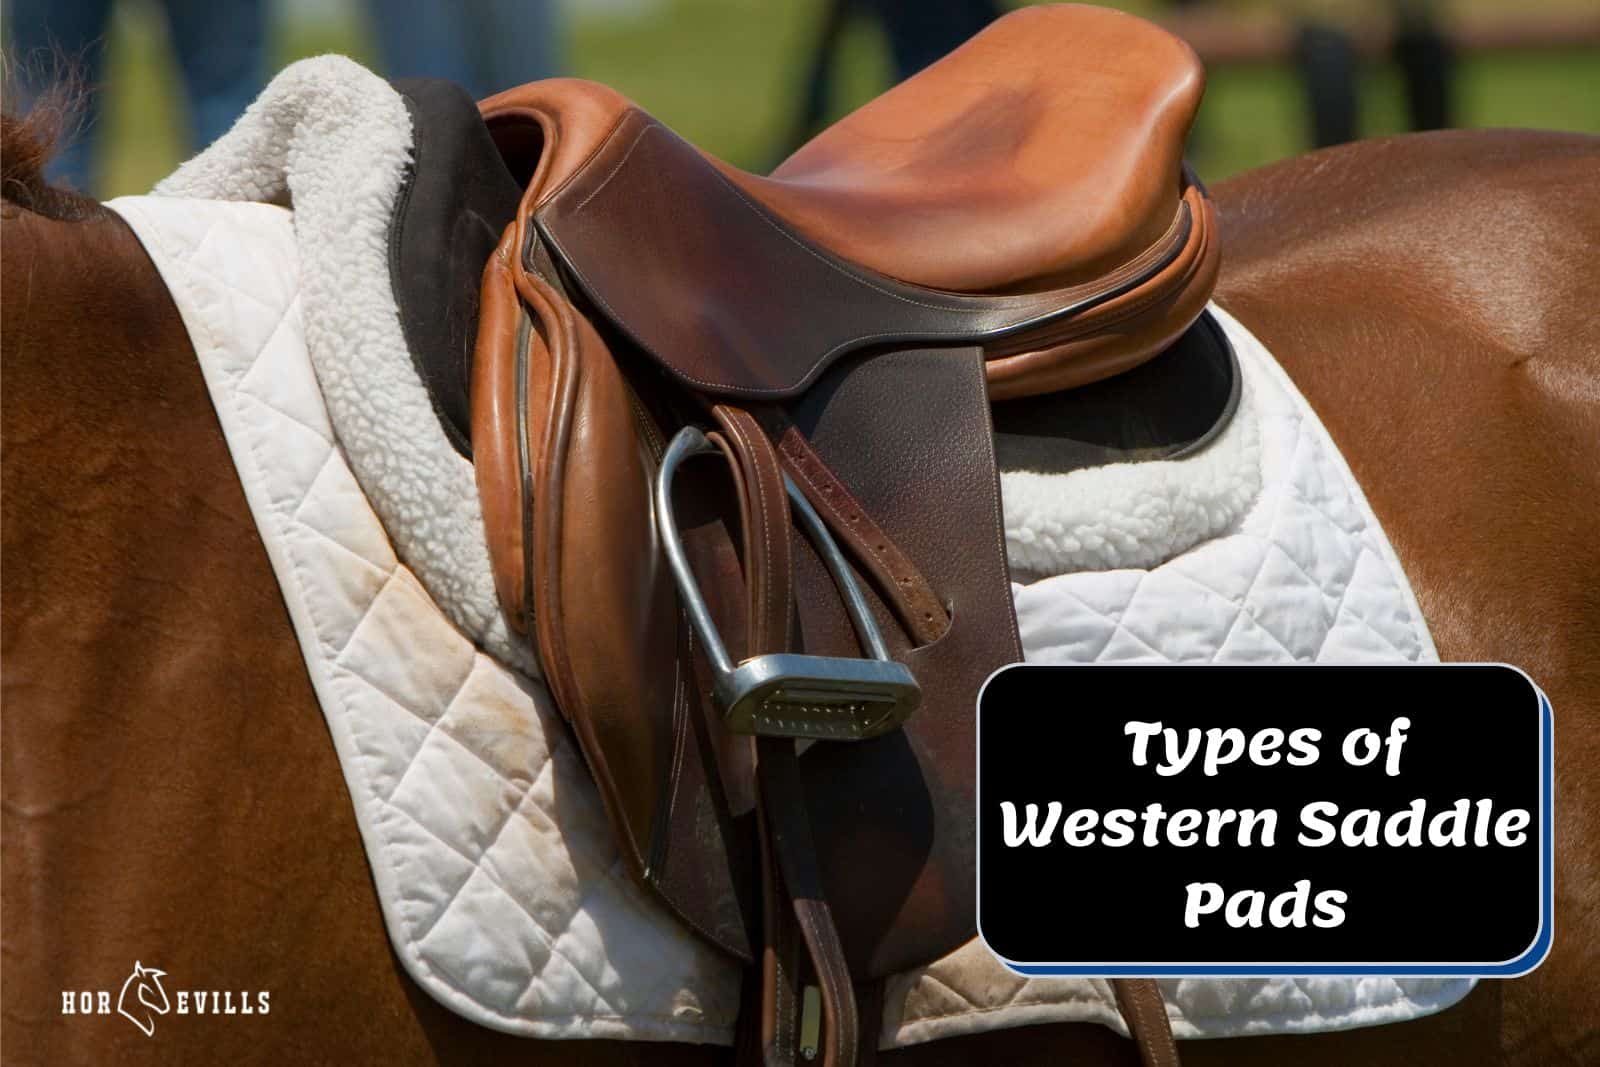 western saddle pad and saddle with the text 